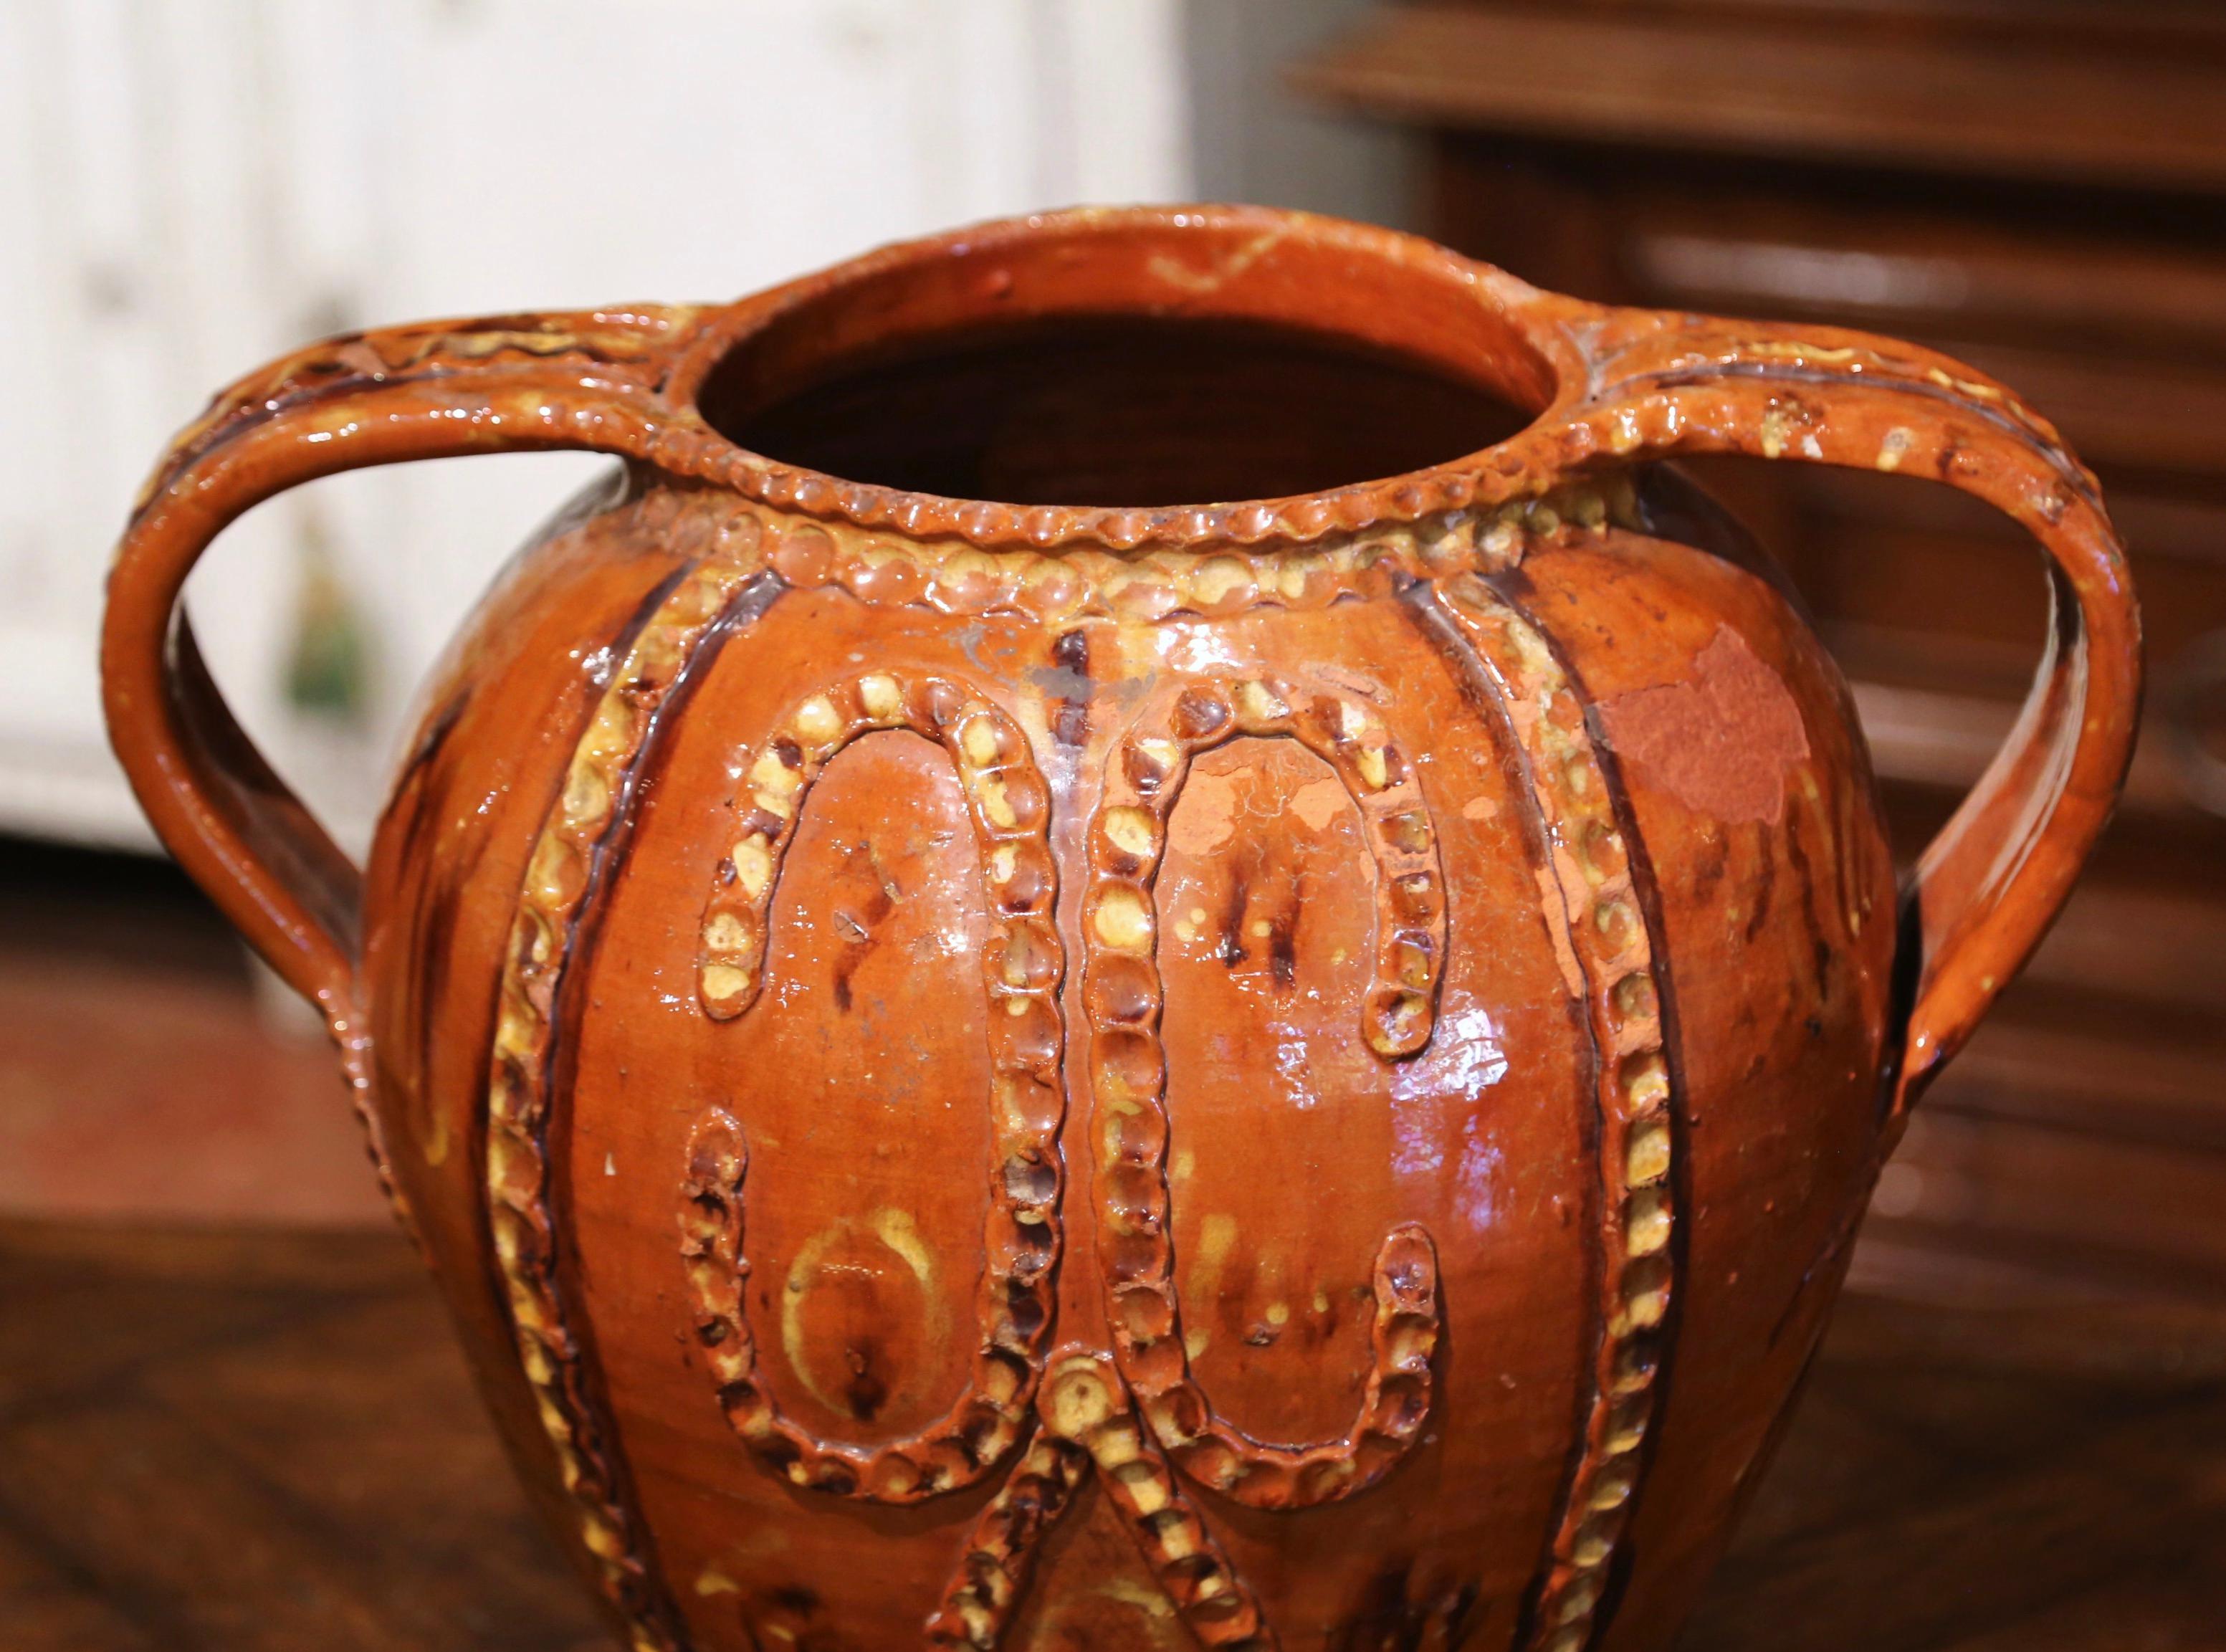 Decorate kitchen cabinets with this antique pottery olive oil pot. Created in Spain circa 1880 and made of terracotta with a brown glaze and beige hand painted motifs in high relief, the jug is round in shape and dressed with elegant side handles.